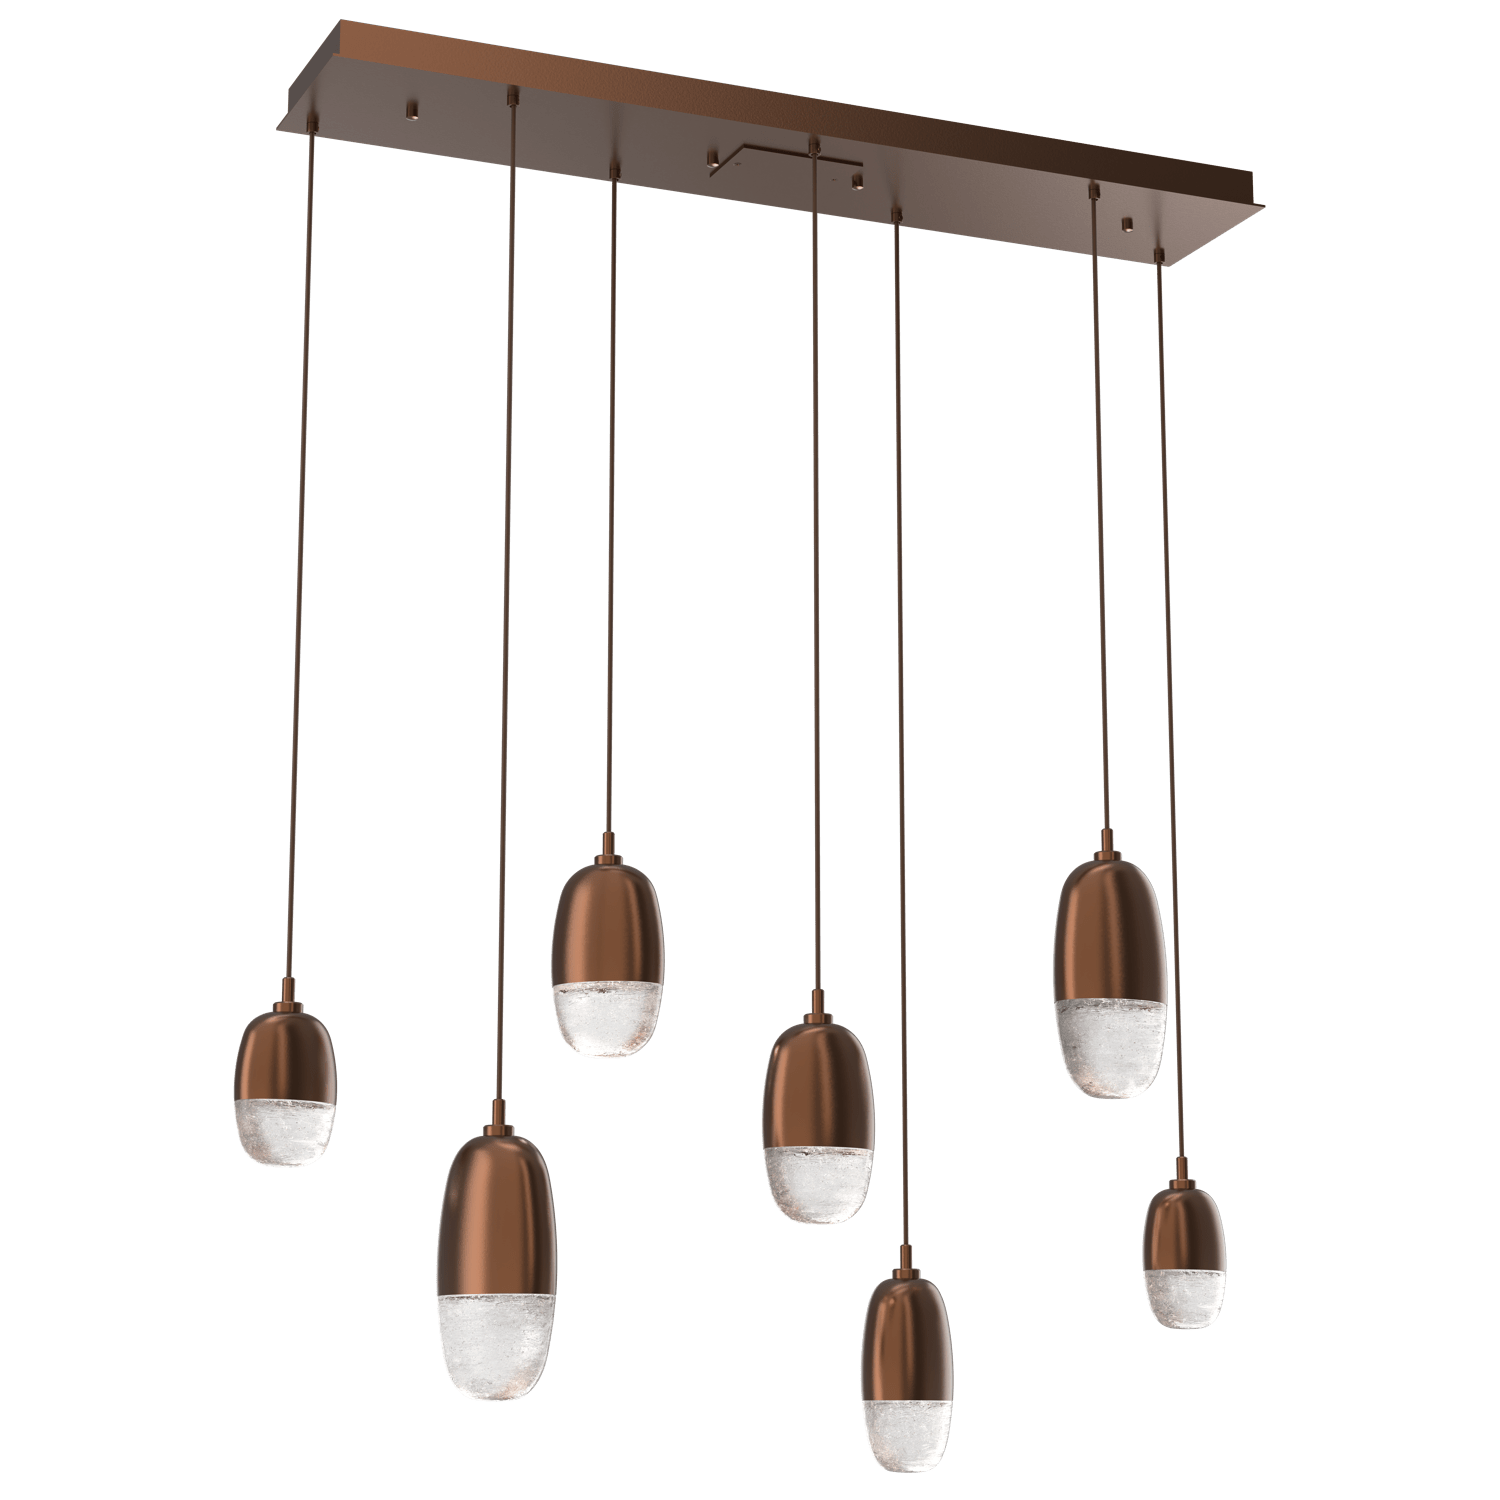 PLB0079-07-BB-Hammerton-Studio-Pebble-7-light-linear-pendant-chandelier-with-burnished-bronze-finish-and-clear-cast-glass-shades-and-LED-lamping